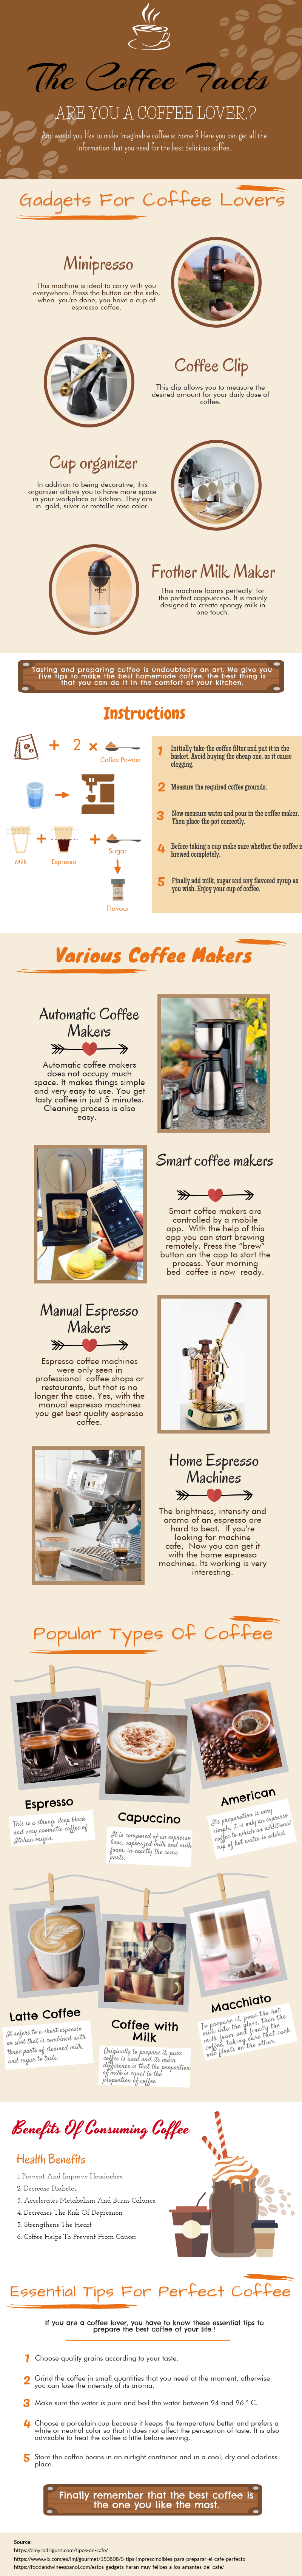 Five Reasons To Drink Coffee